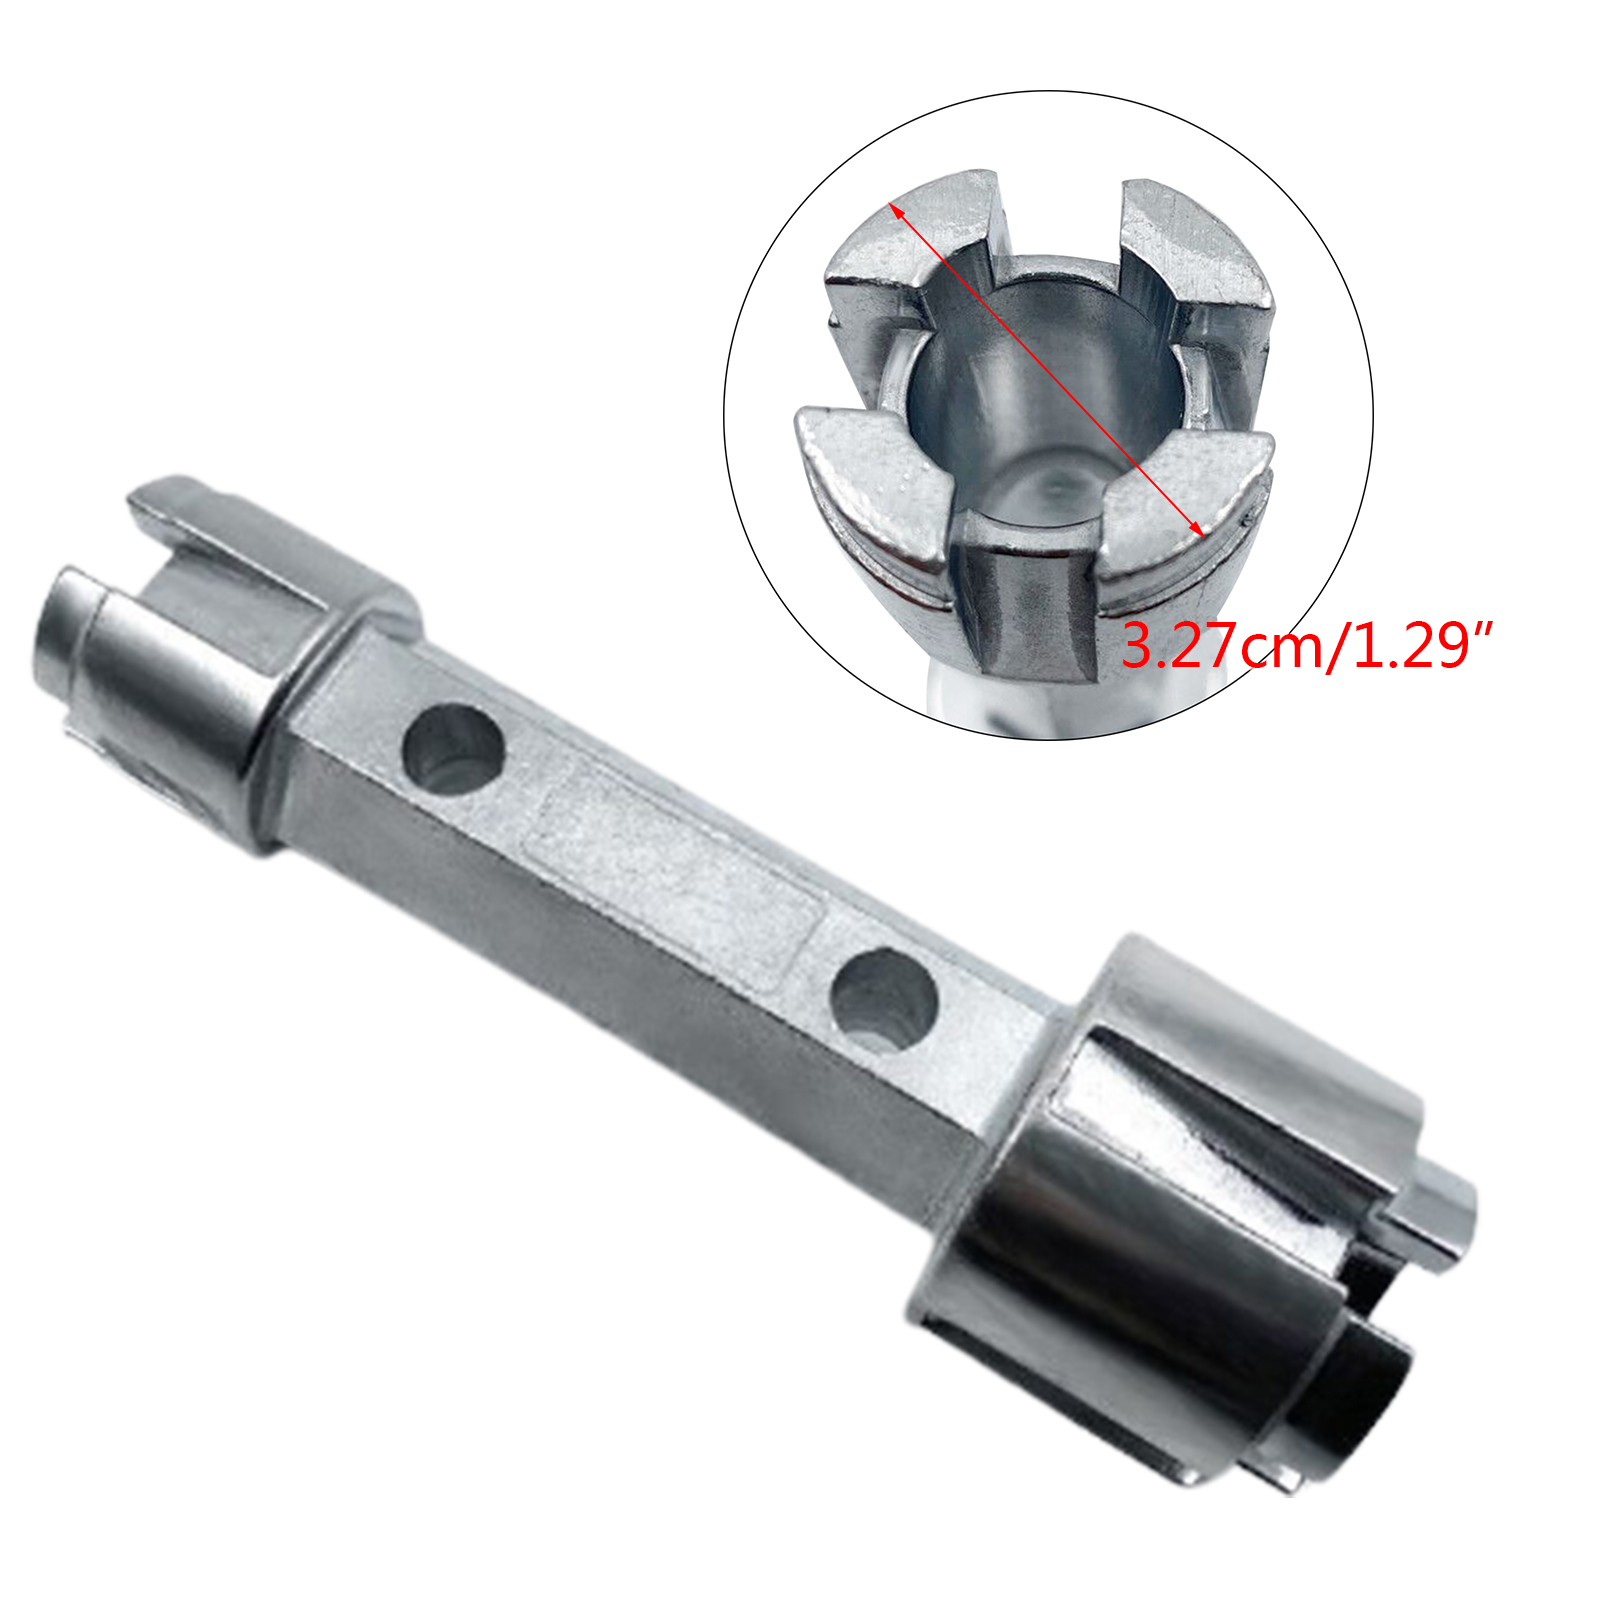 Portable Tub Drain Remover Wrench Metal Alloy Tub Dual Ended Drain Wrench - image 5 of 5